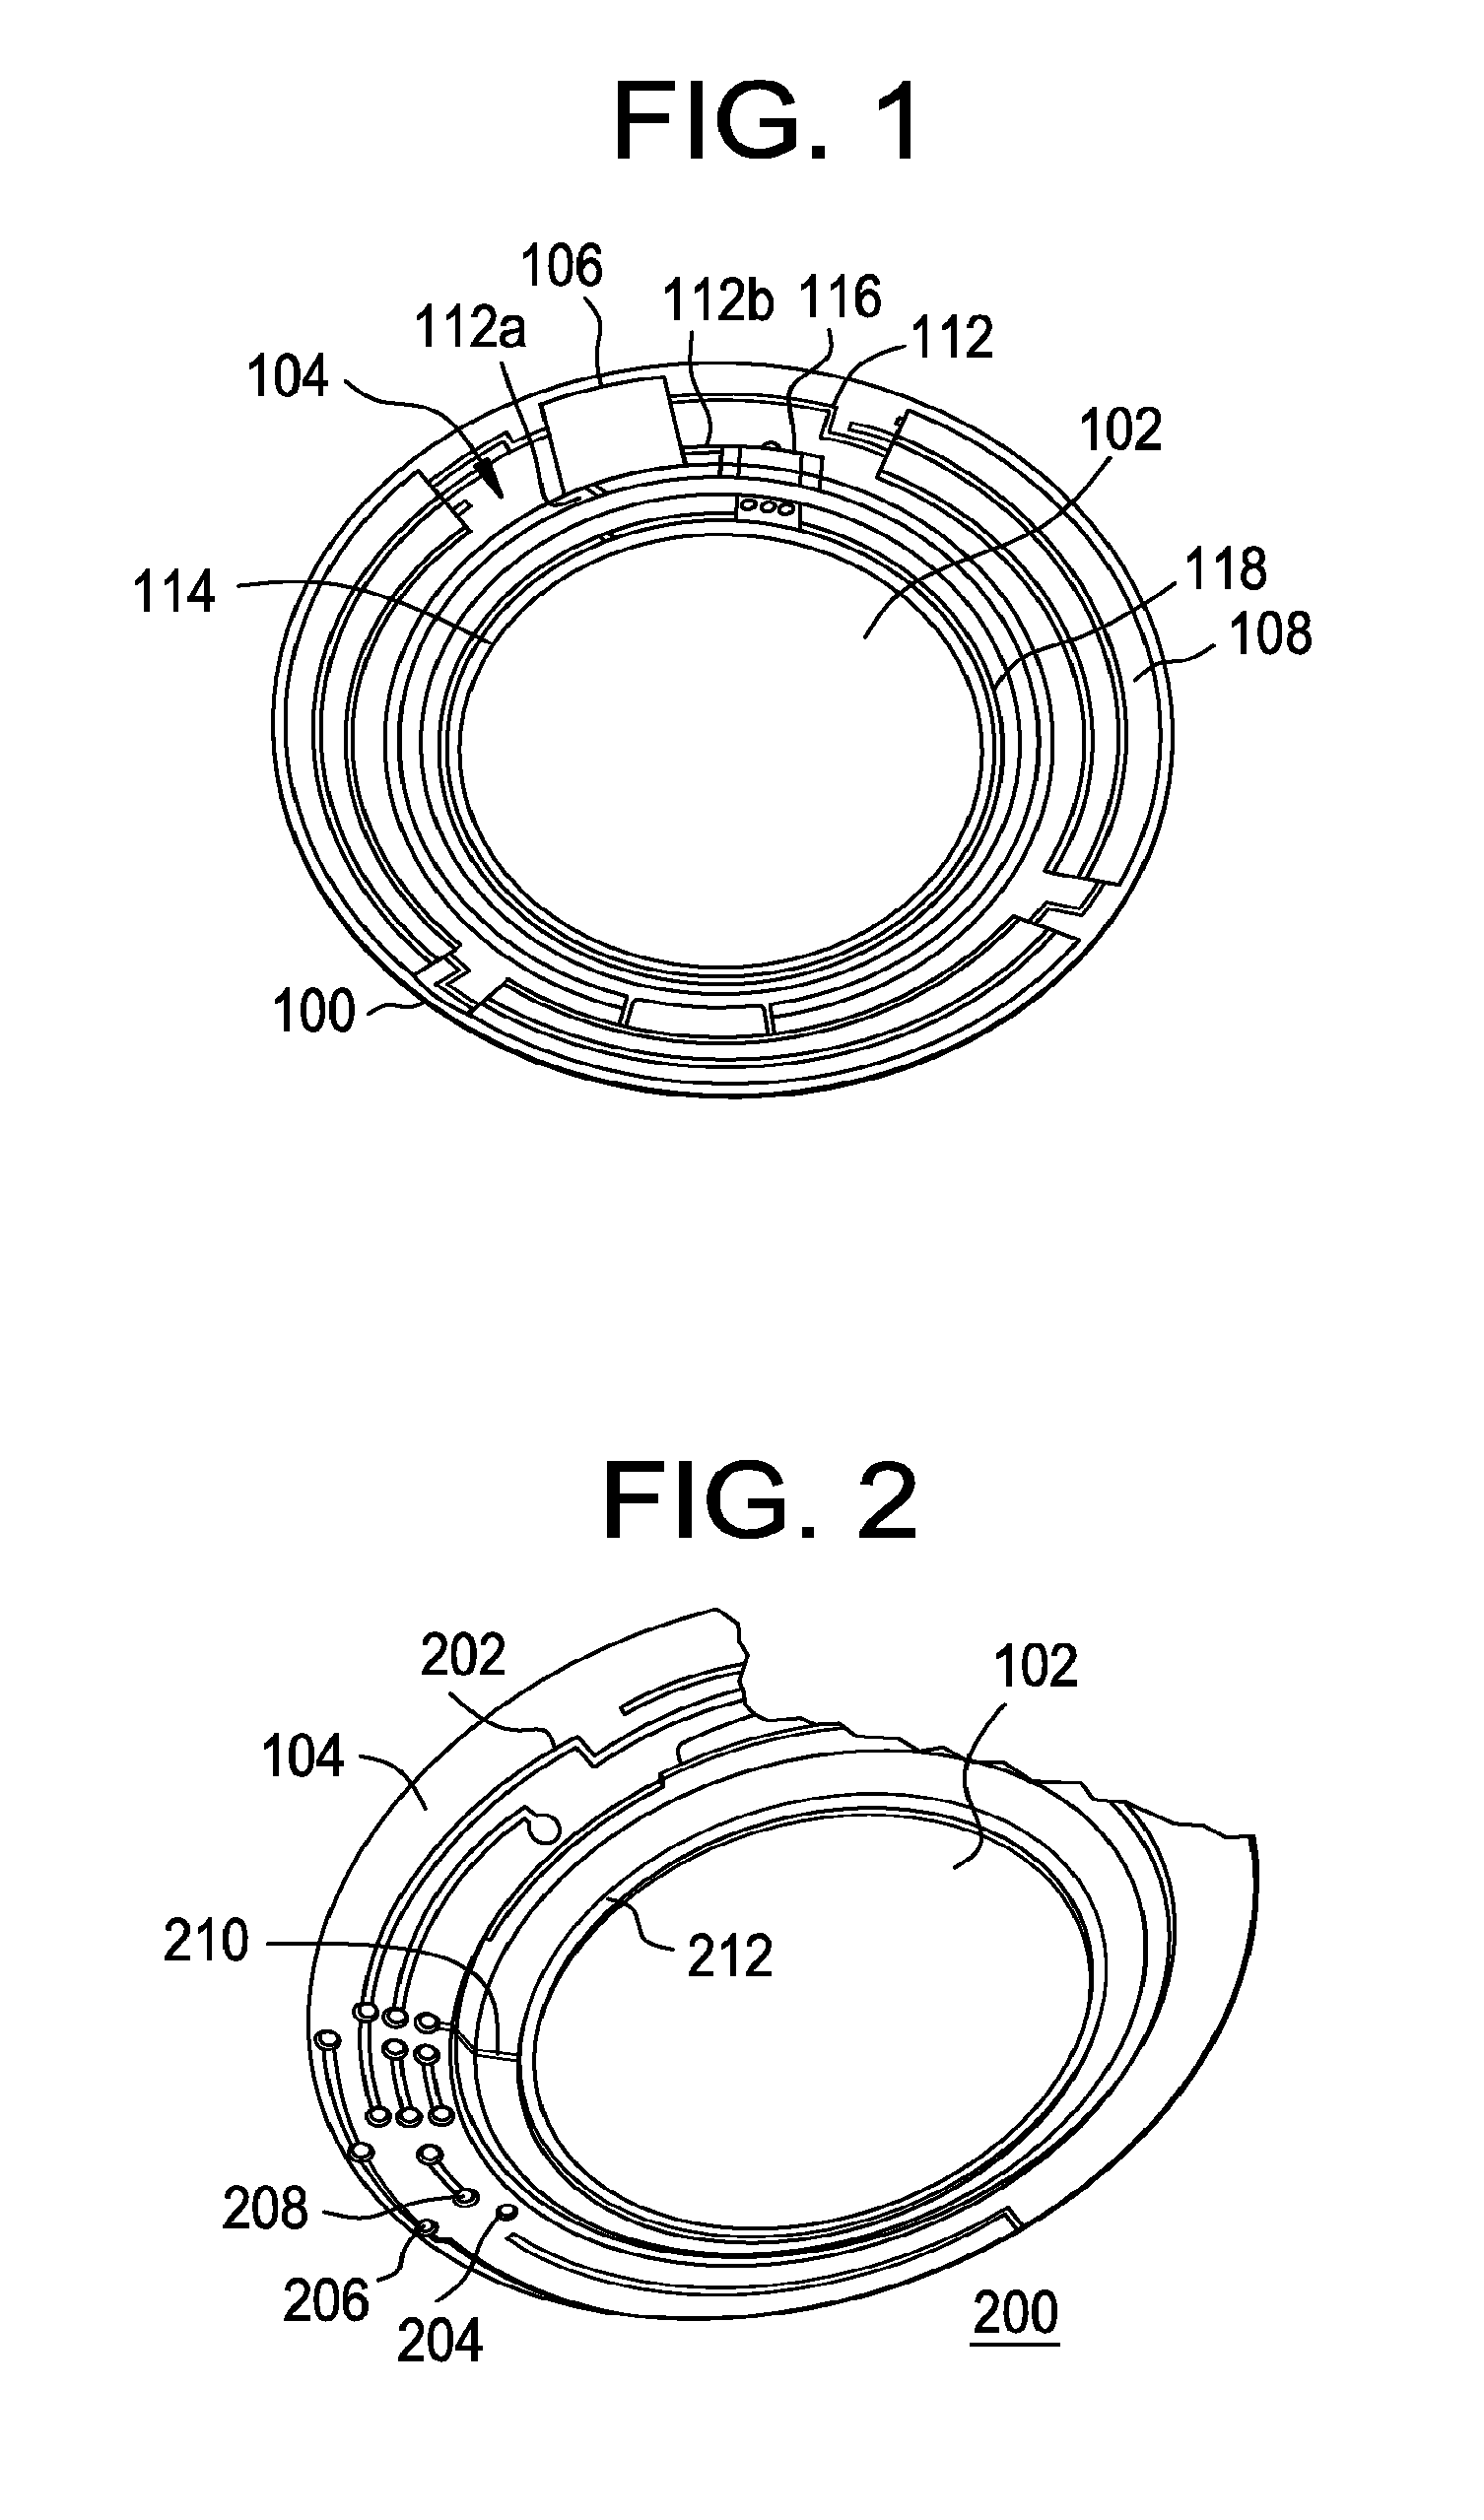 Electrical interconnects in an electronic contact lens